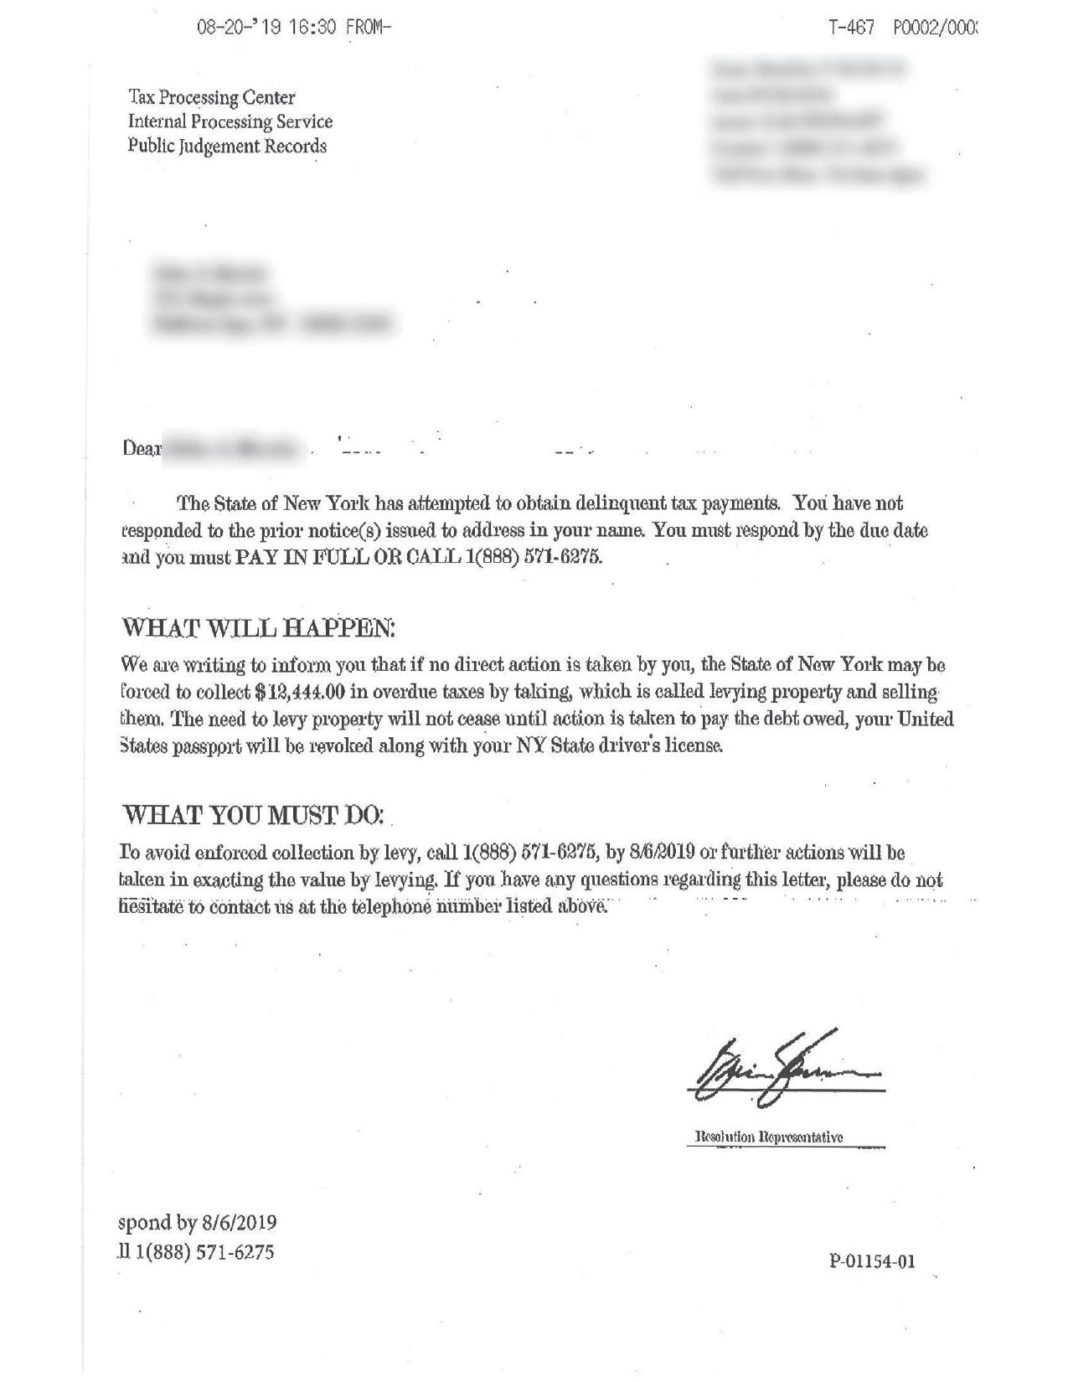 scam-alert-bogus-letters-demanding-payment-sent-to-new-york-taxpayers